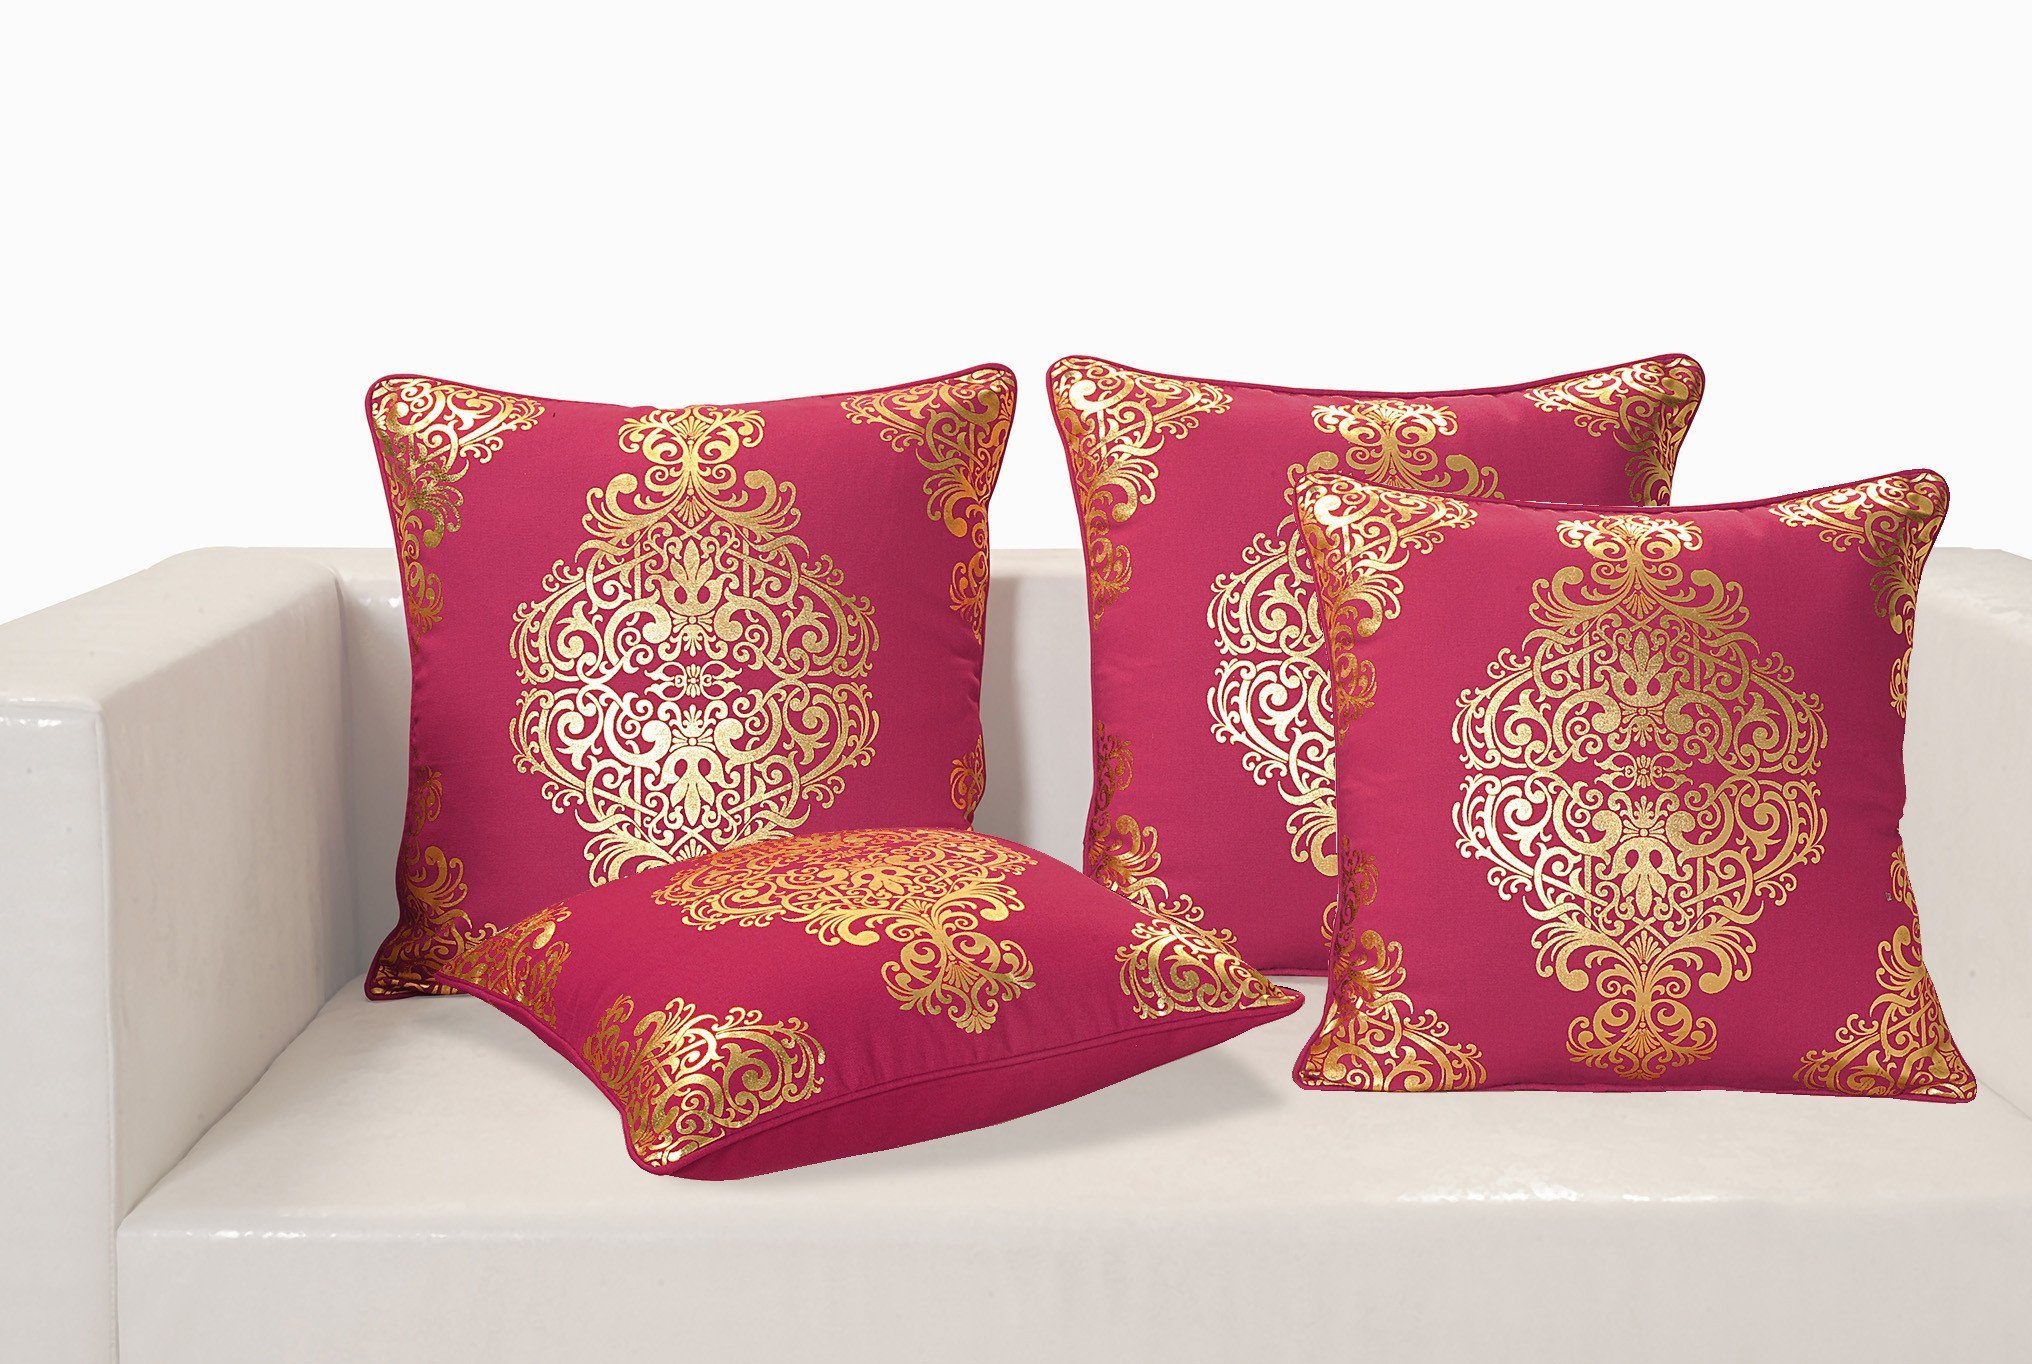 GOLD BERRY FOIL CUSHION COVER - Flickdeal.co.nz